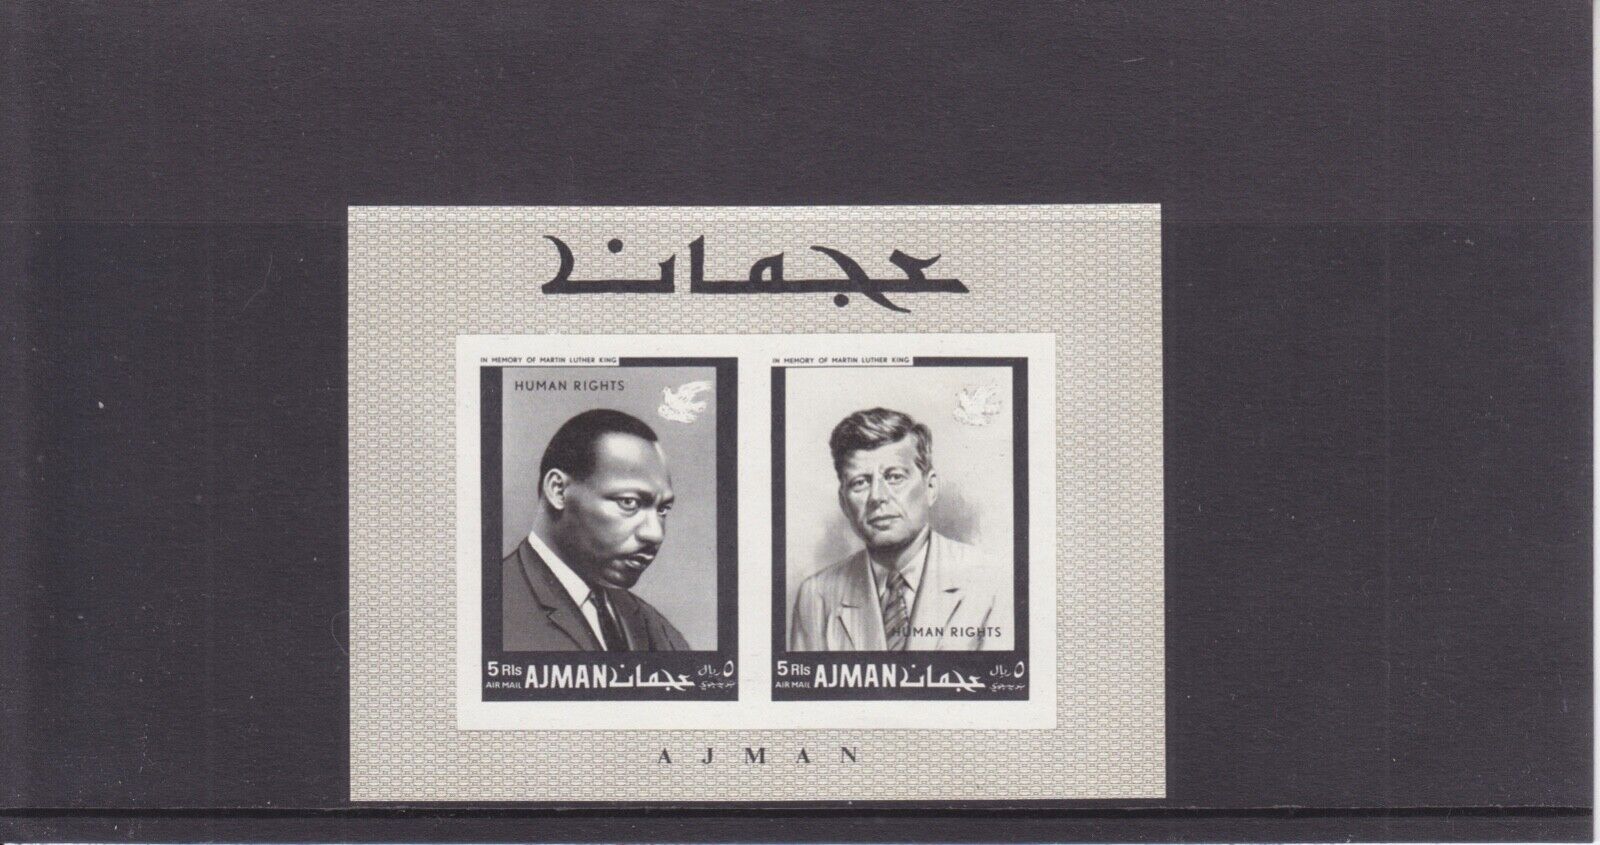 Ajman 1968 - International Human Rights Sheet IMPERF Mini Year Spring new work one after Atlanta Mall another